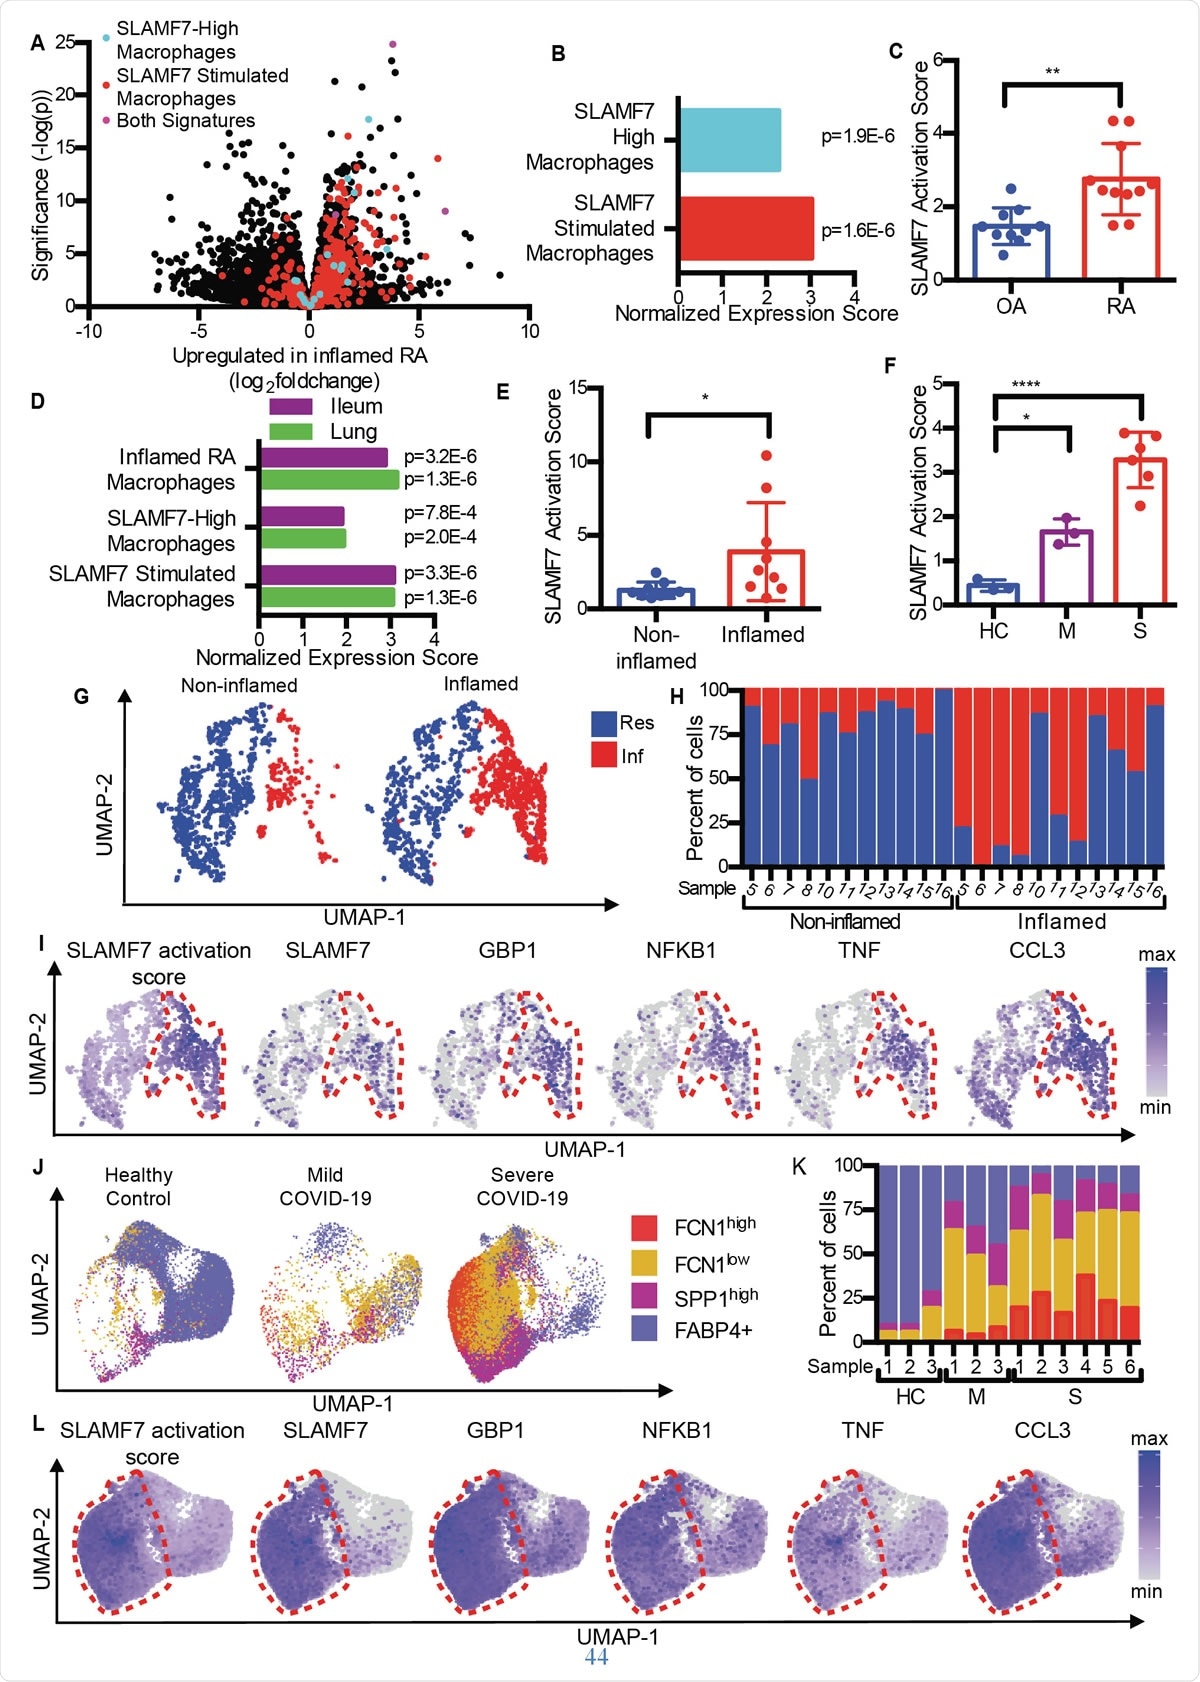 SLAMF7 super-activated macrophages drive inflammation in autoimmune and infectious disease